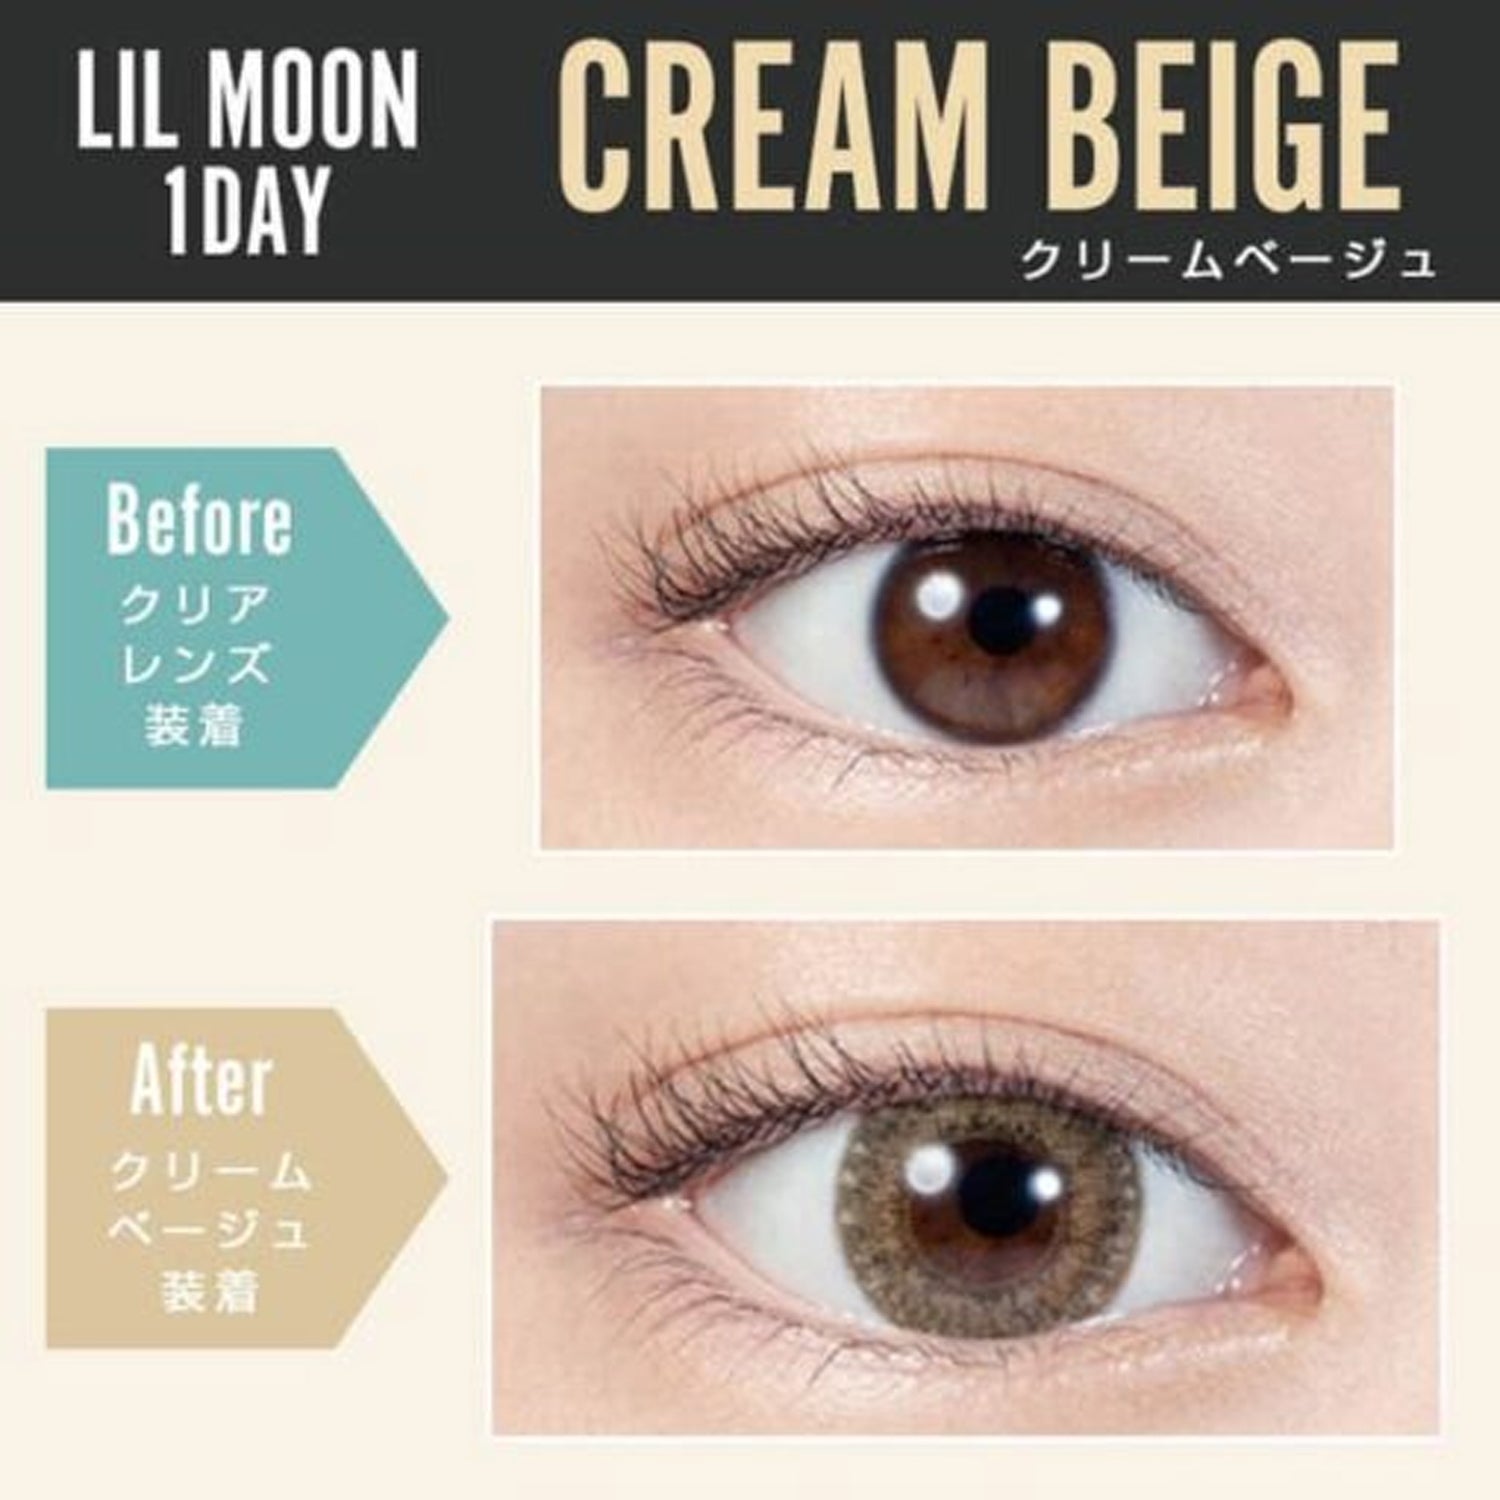 LIL MOON Daily Contact Lenses-Cream Beige